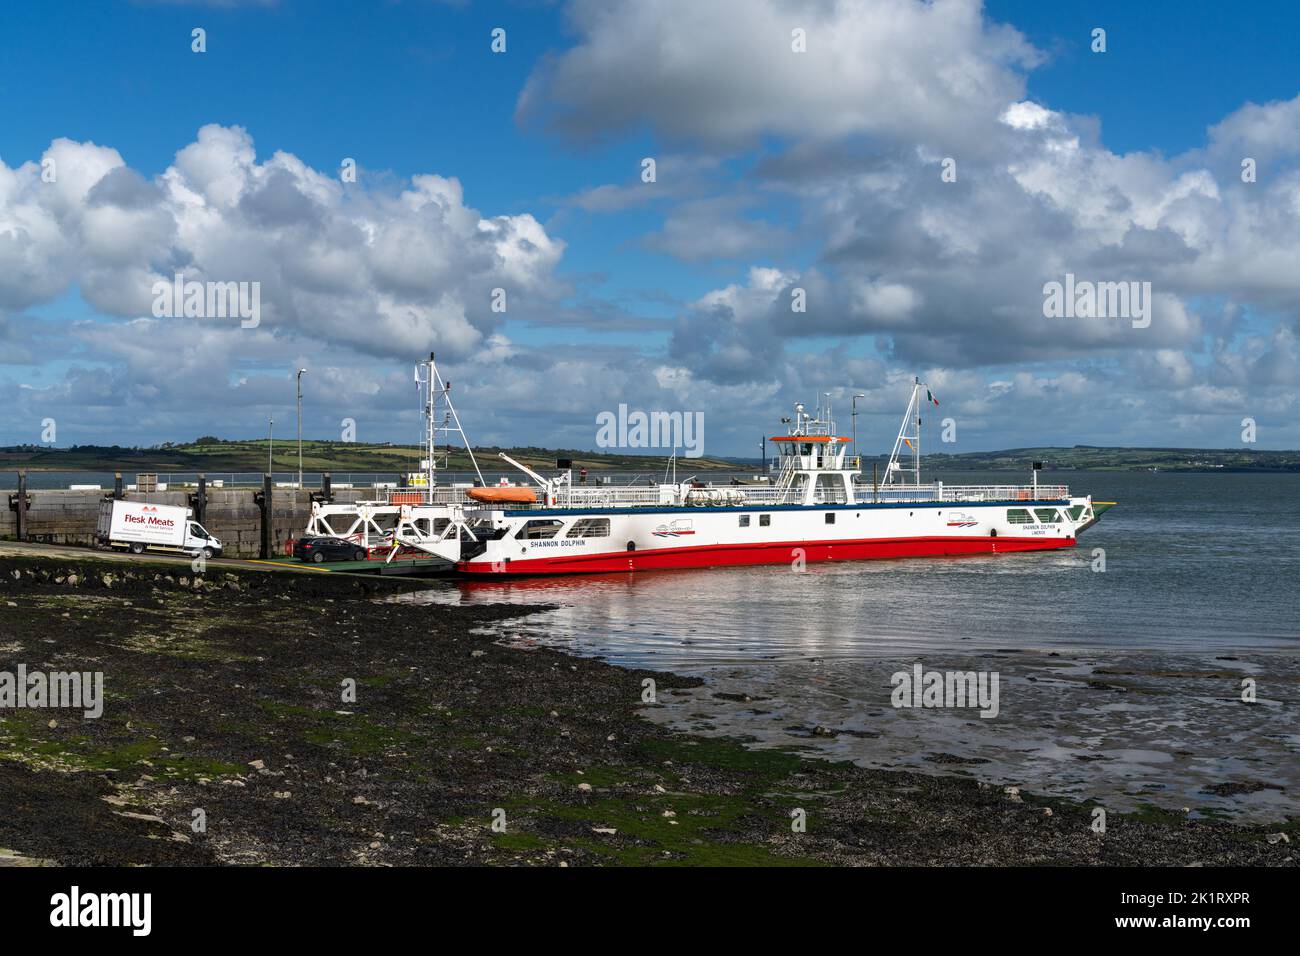 Tarbert, Ireland - 4 August, 2022: the Tarbert ferry landing at the ferry terminal on the Shannon River Estuary in western Ireland Stock Photo